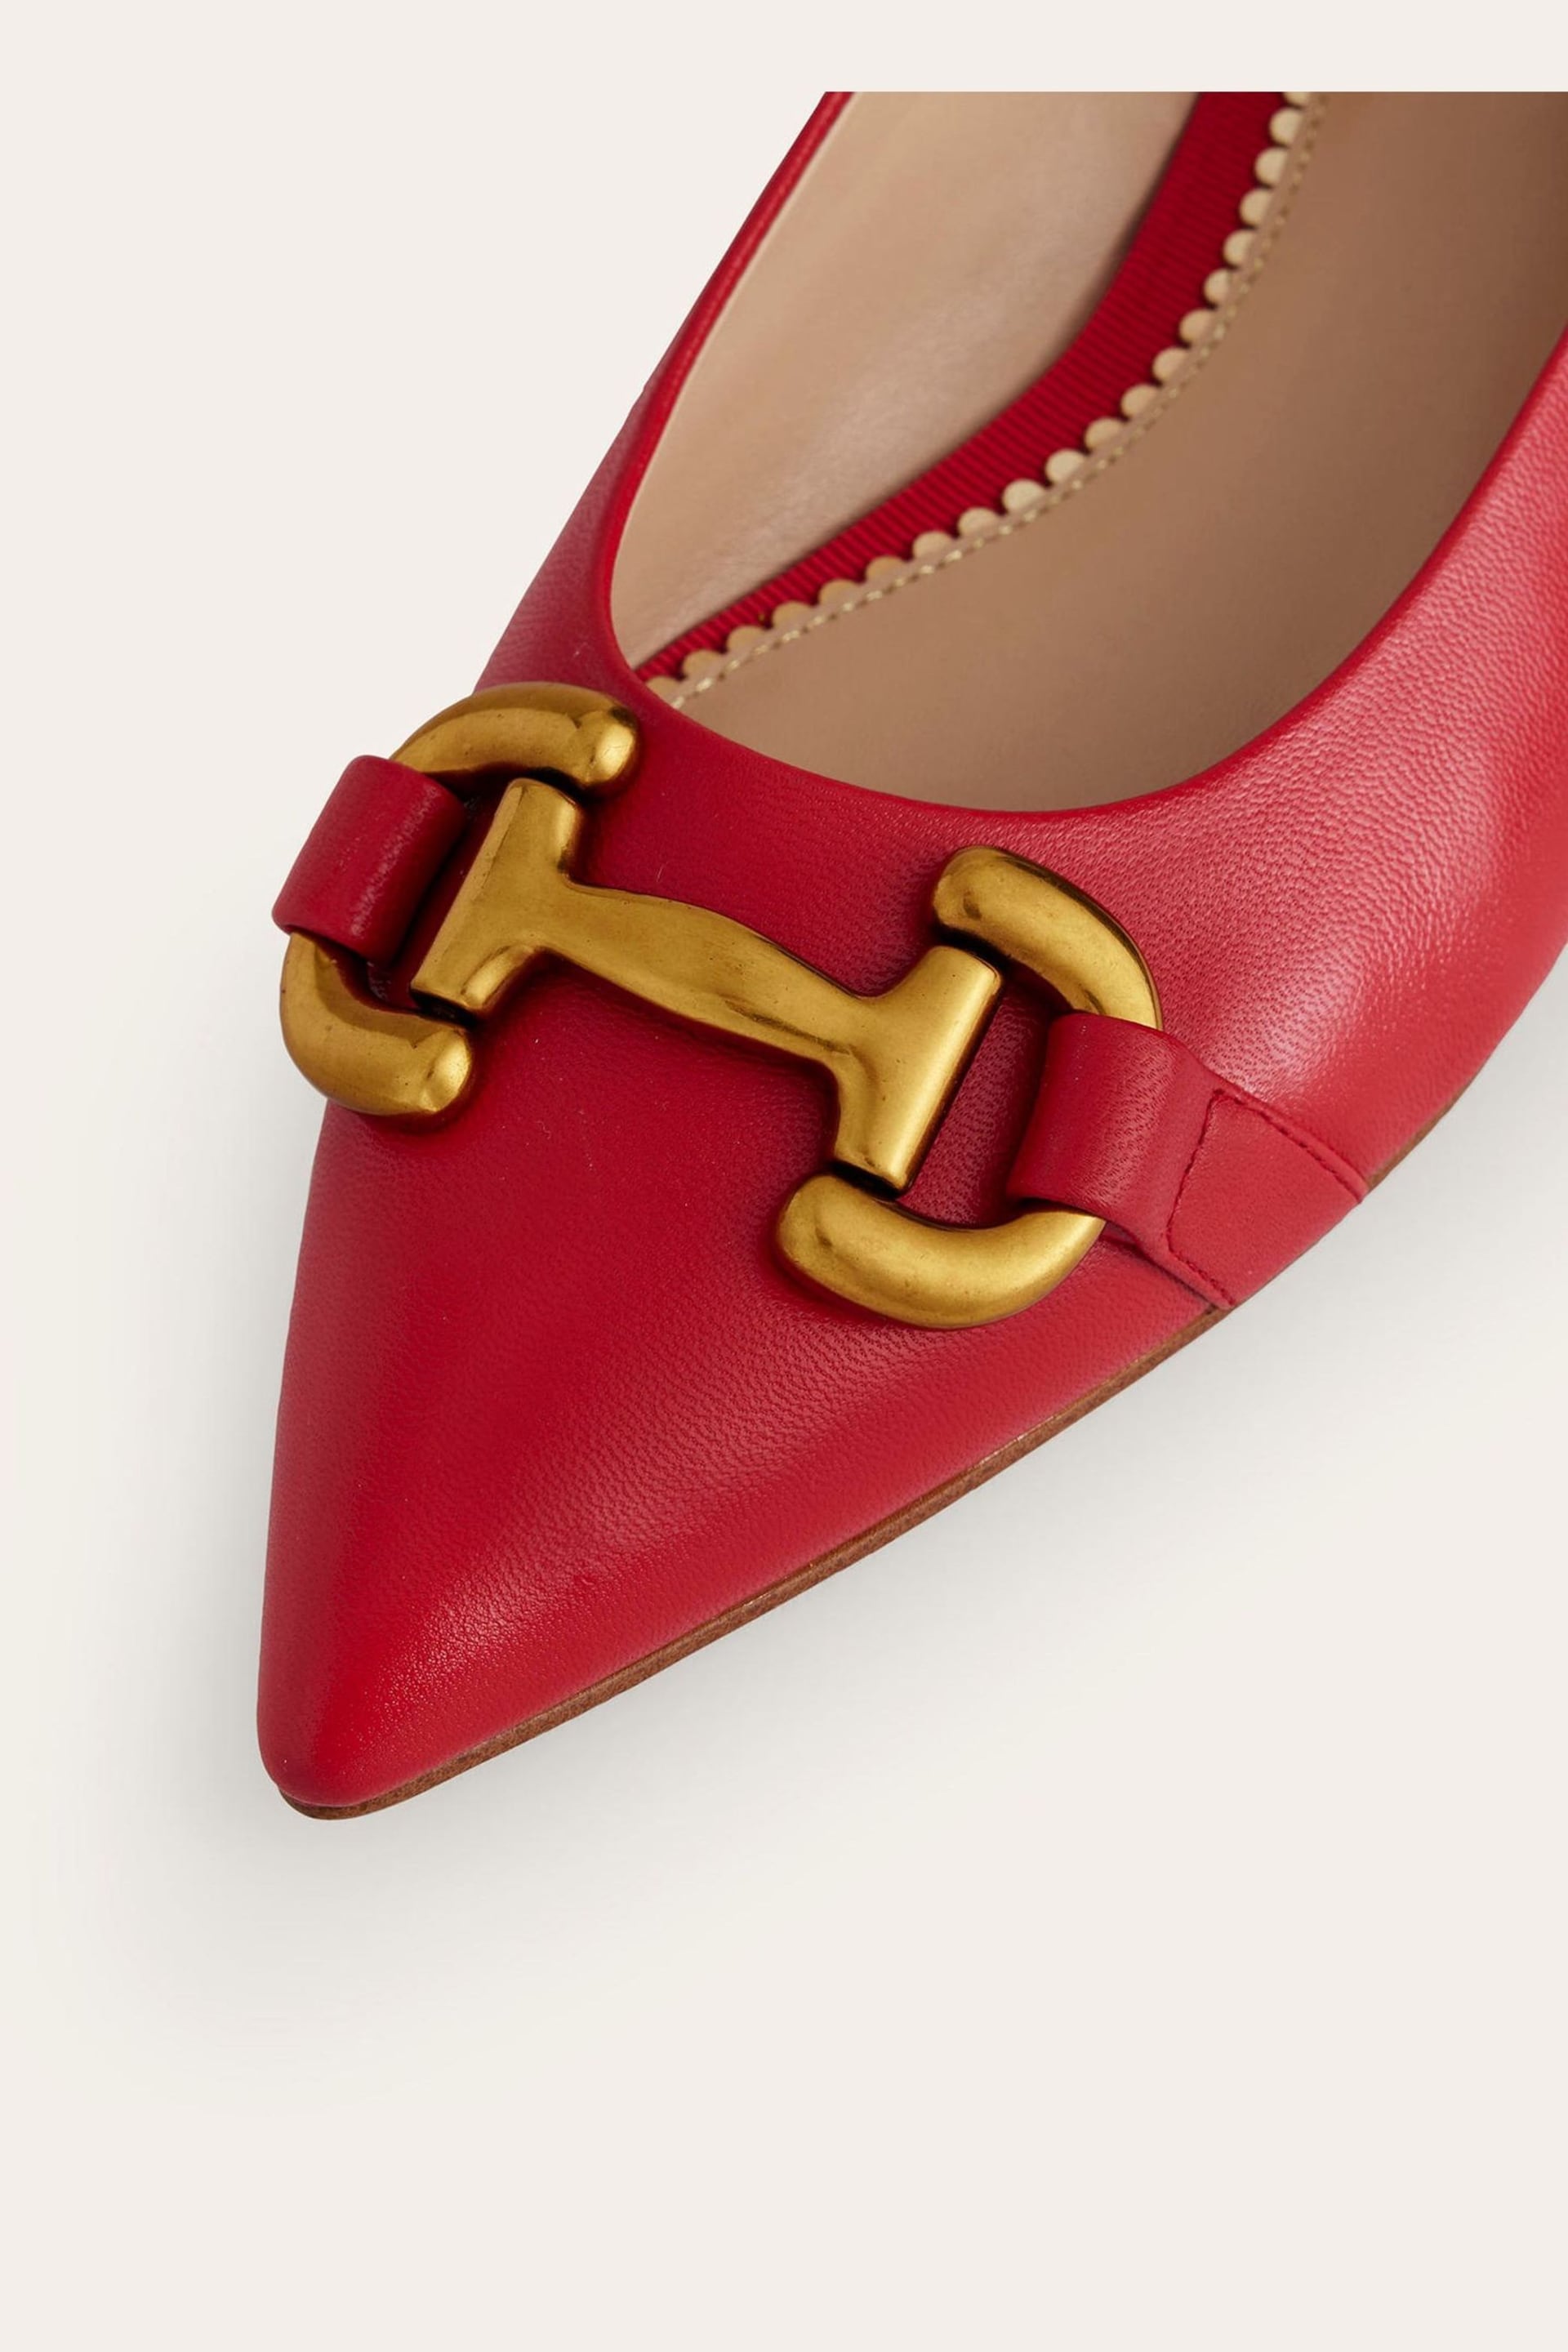 Boden Red Iris Snaffle Ballet Shoes - Image 4 of 4